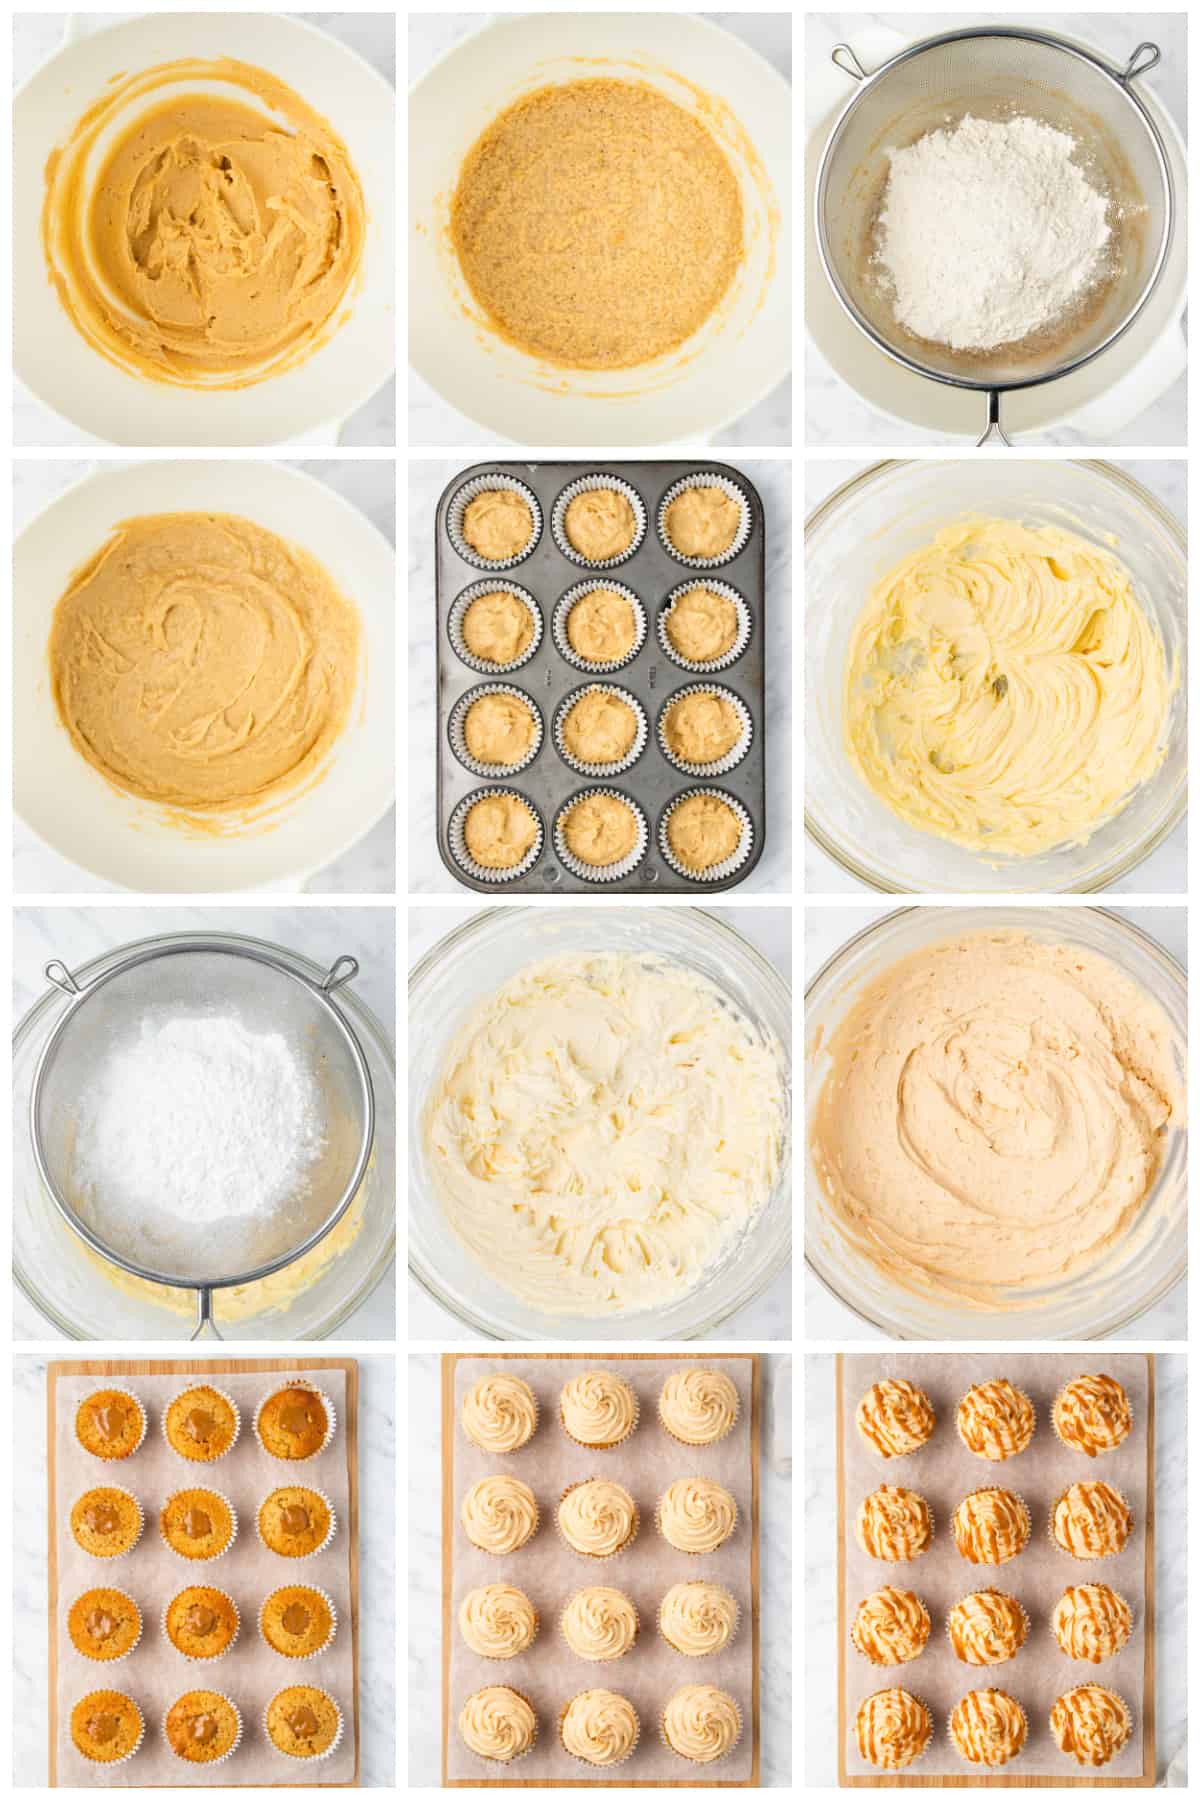 Step by step photos on how to make Salted Caramel Cupcakes.